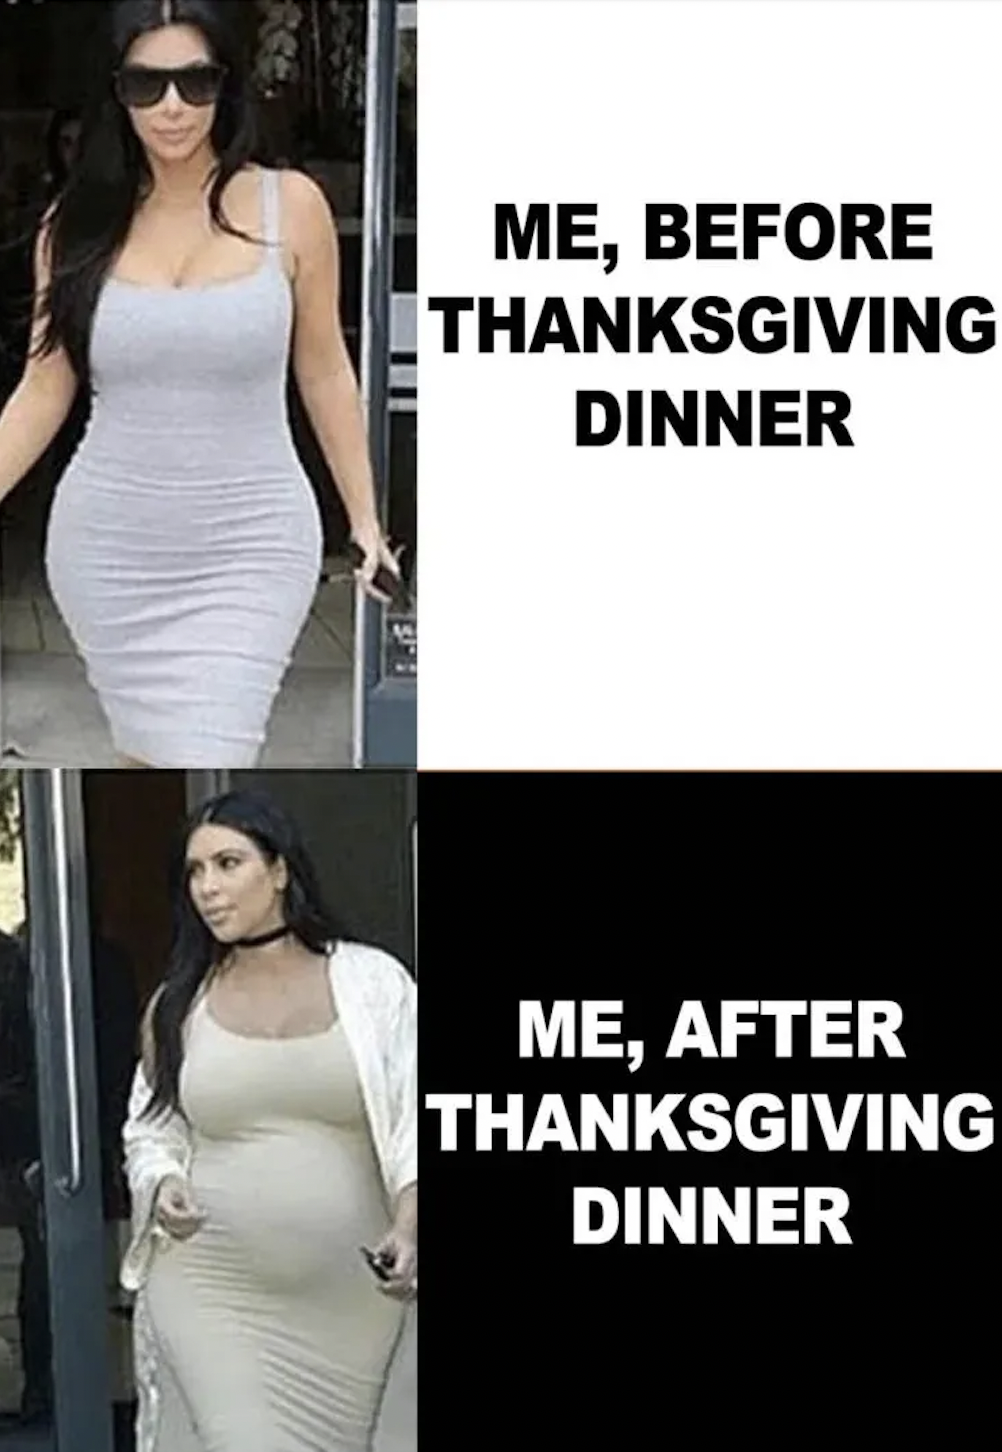 thanksgiving funny memes - Me, Before Thanksgiving Dinner Me, After Thanksgiving Dinner